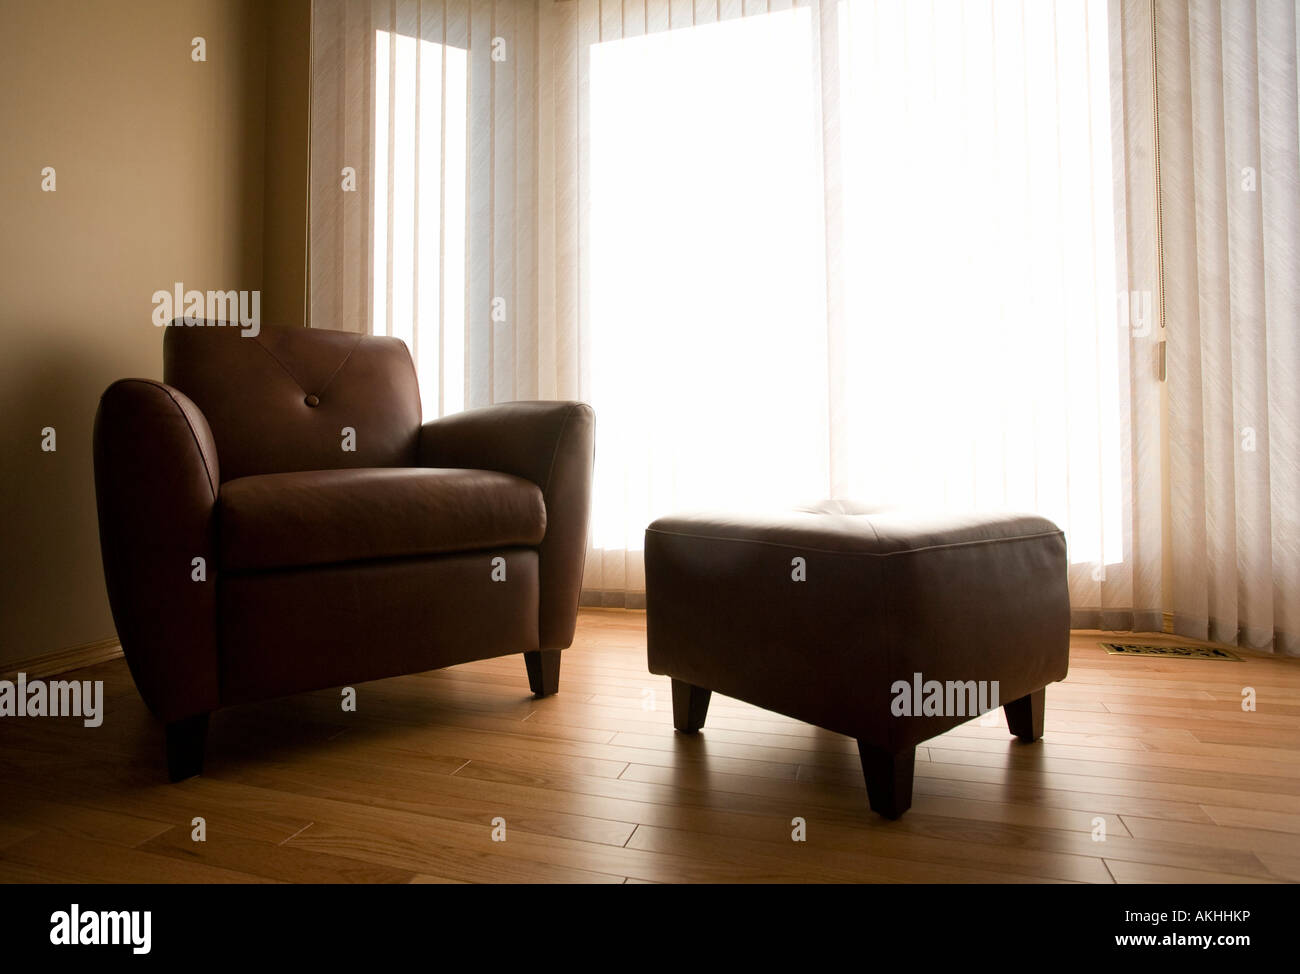 Living room with armchair and ottoman Stock Photo